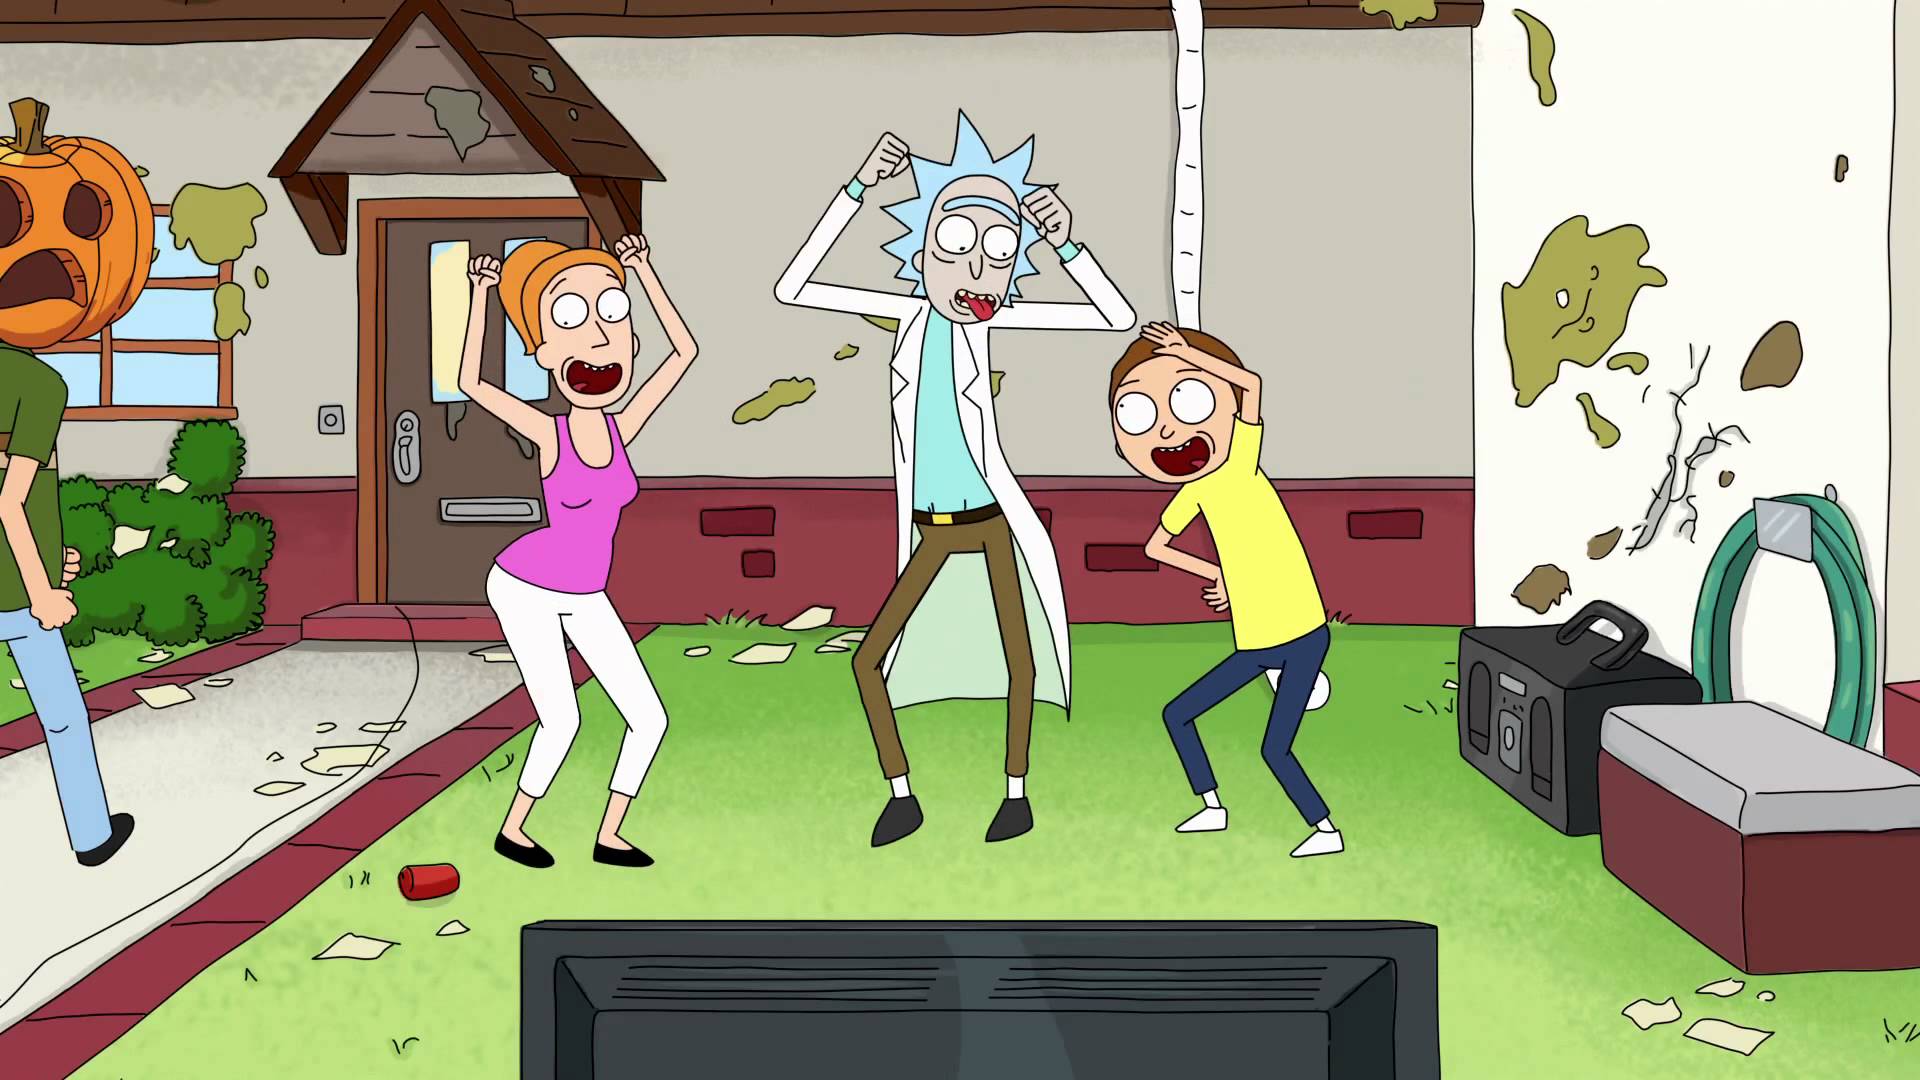 rick and morty, jerry smith, tv show, morty smith, rick sanchez, summer smith